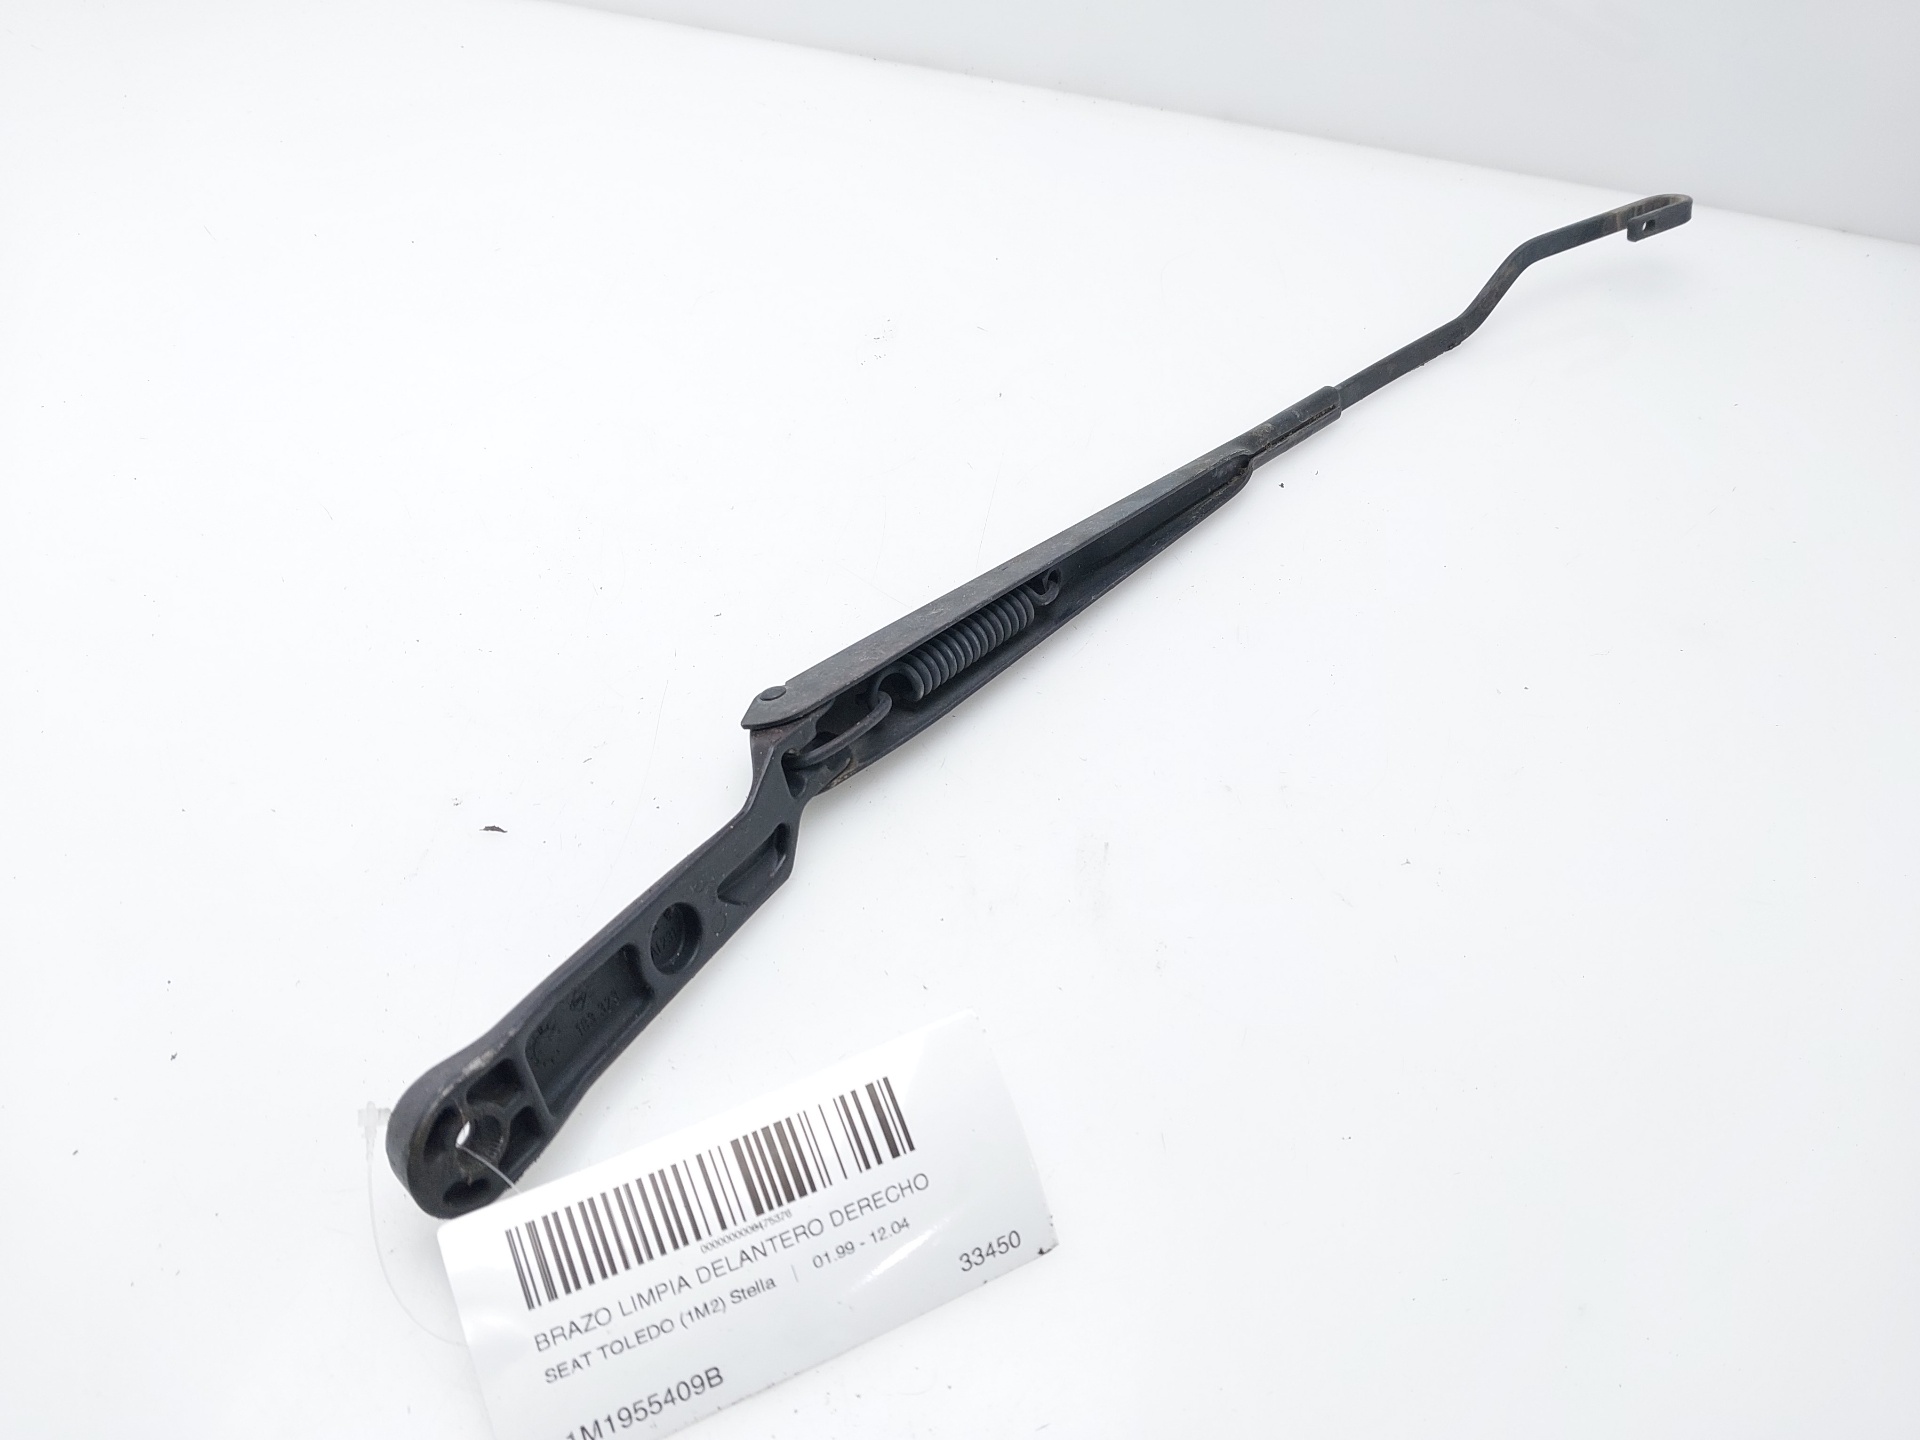 SEAT Toledo 2 generation (1999-2006) Front Wiper Arms 1M1955409B 22918374